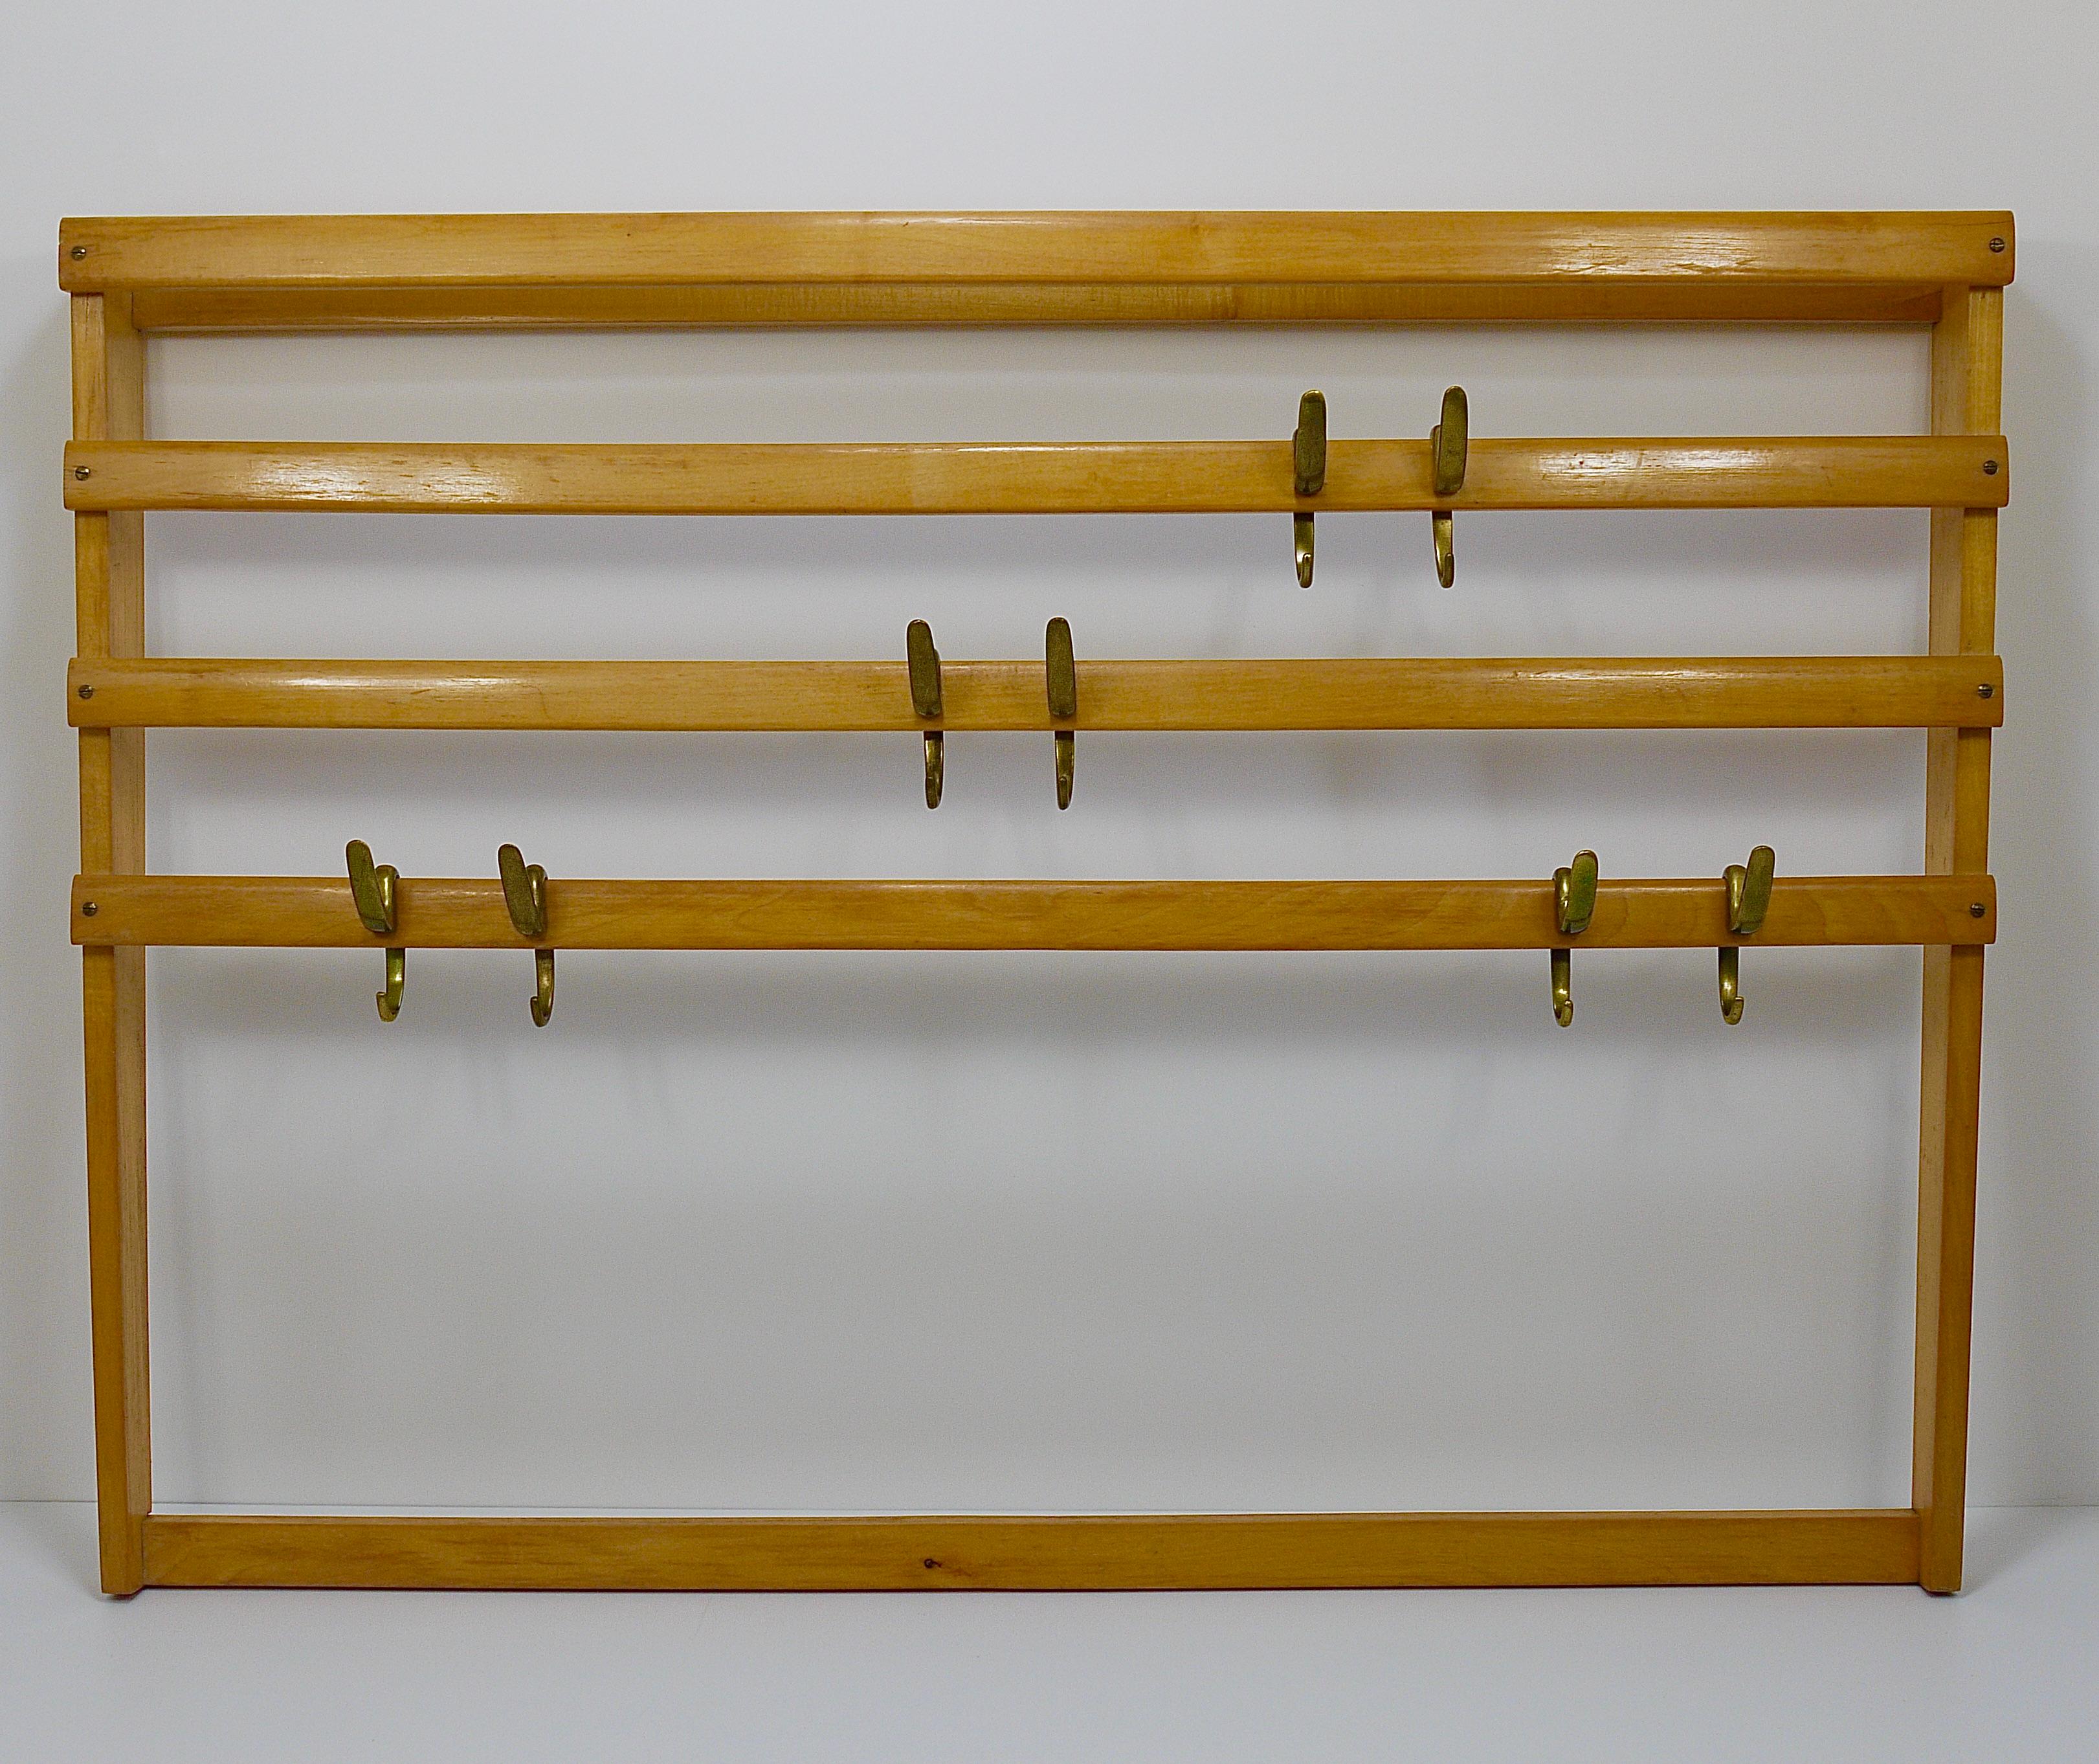 An elegant modernist wall-mounted coat rack from the 1950s. An original and old vintage object, designed and manufactured by the Austrian architect and designer Carl Auböck. The frame is made of beechwood with nice brass screws. It is equipped with